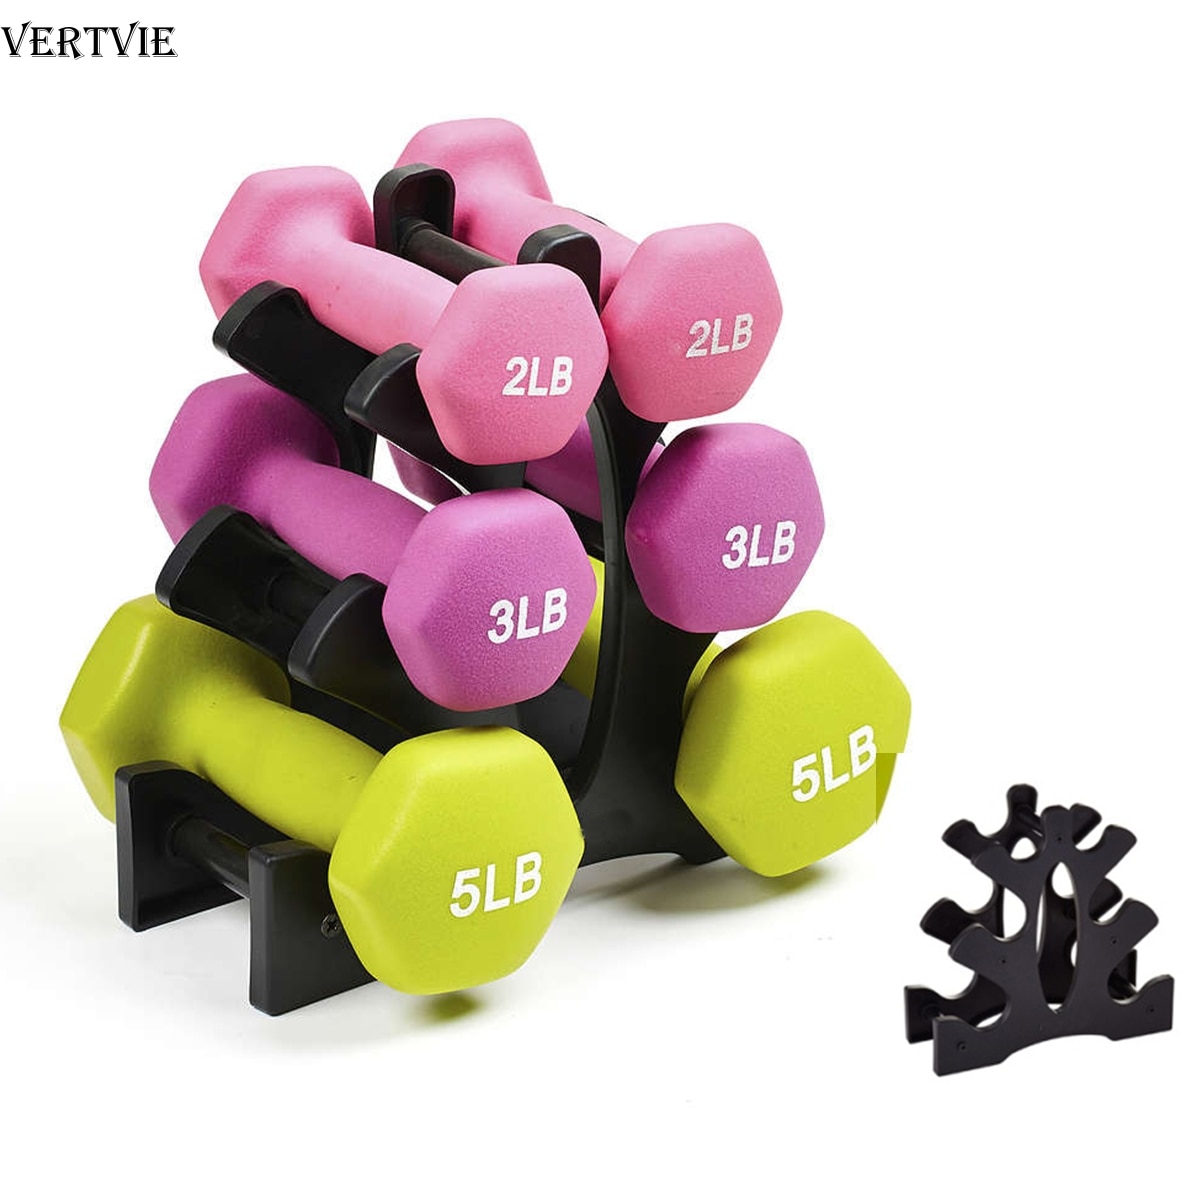 Dumbbell Storage Rack Stand 3-layer Hand-held Dumbbell Storage Rack For Home Office Gym Sport Exercise Accessories